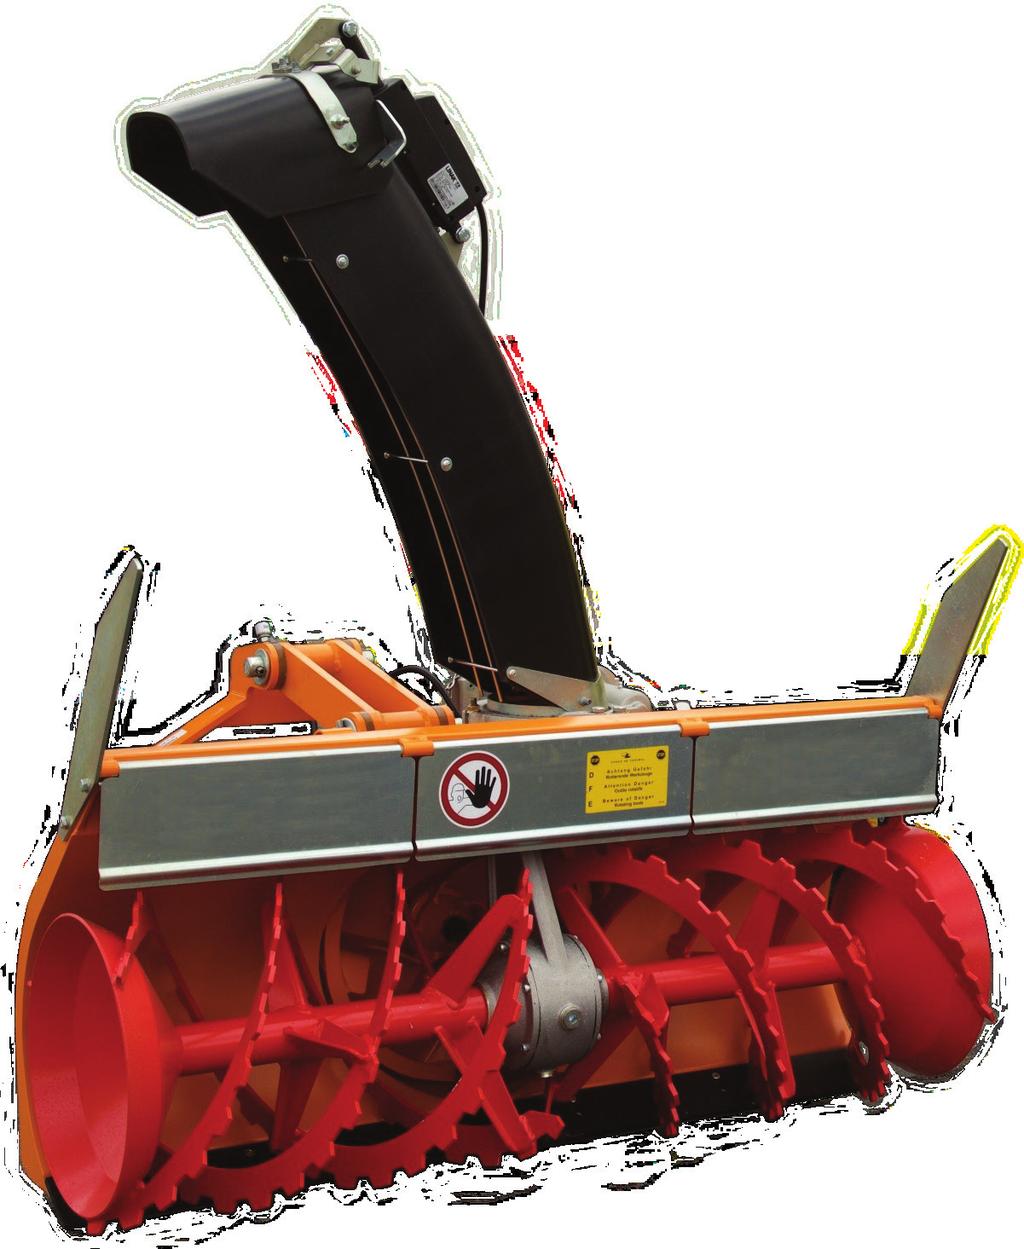 Snow Blower - Medium SF65E, SF72E, SF72 We offers 3 models of ejection chutes - a basic economy model, lightweight stainless steel model and a strengthened steel chute to handle constant rocks /